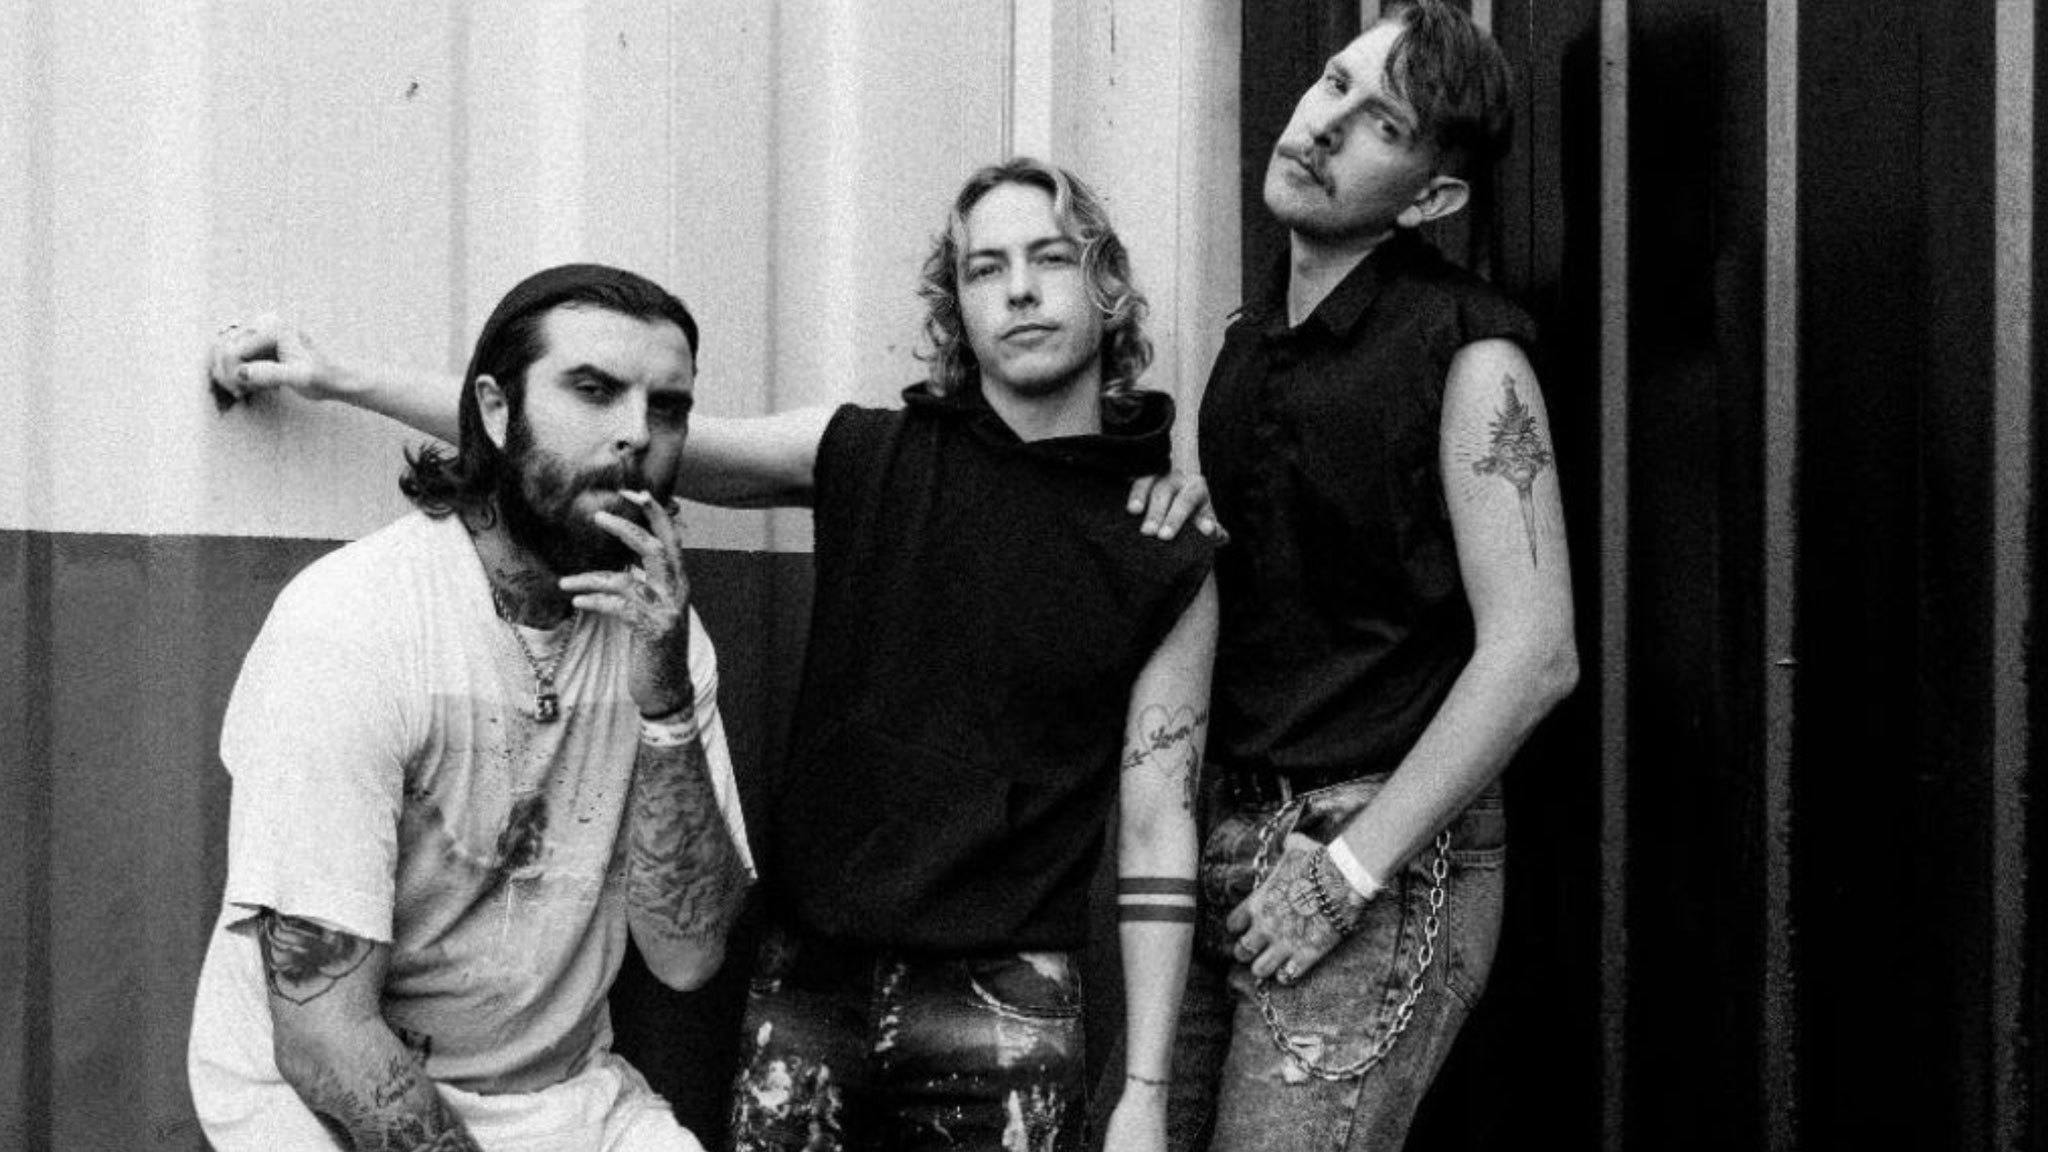 The Hunna drop two new singles, Fugazi and Untouched Hearts